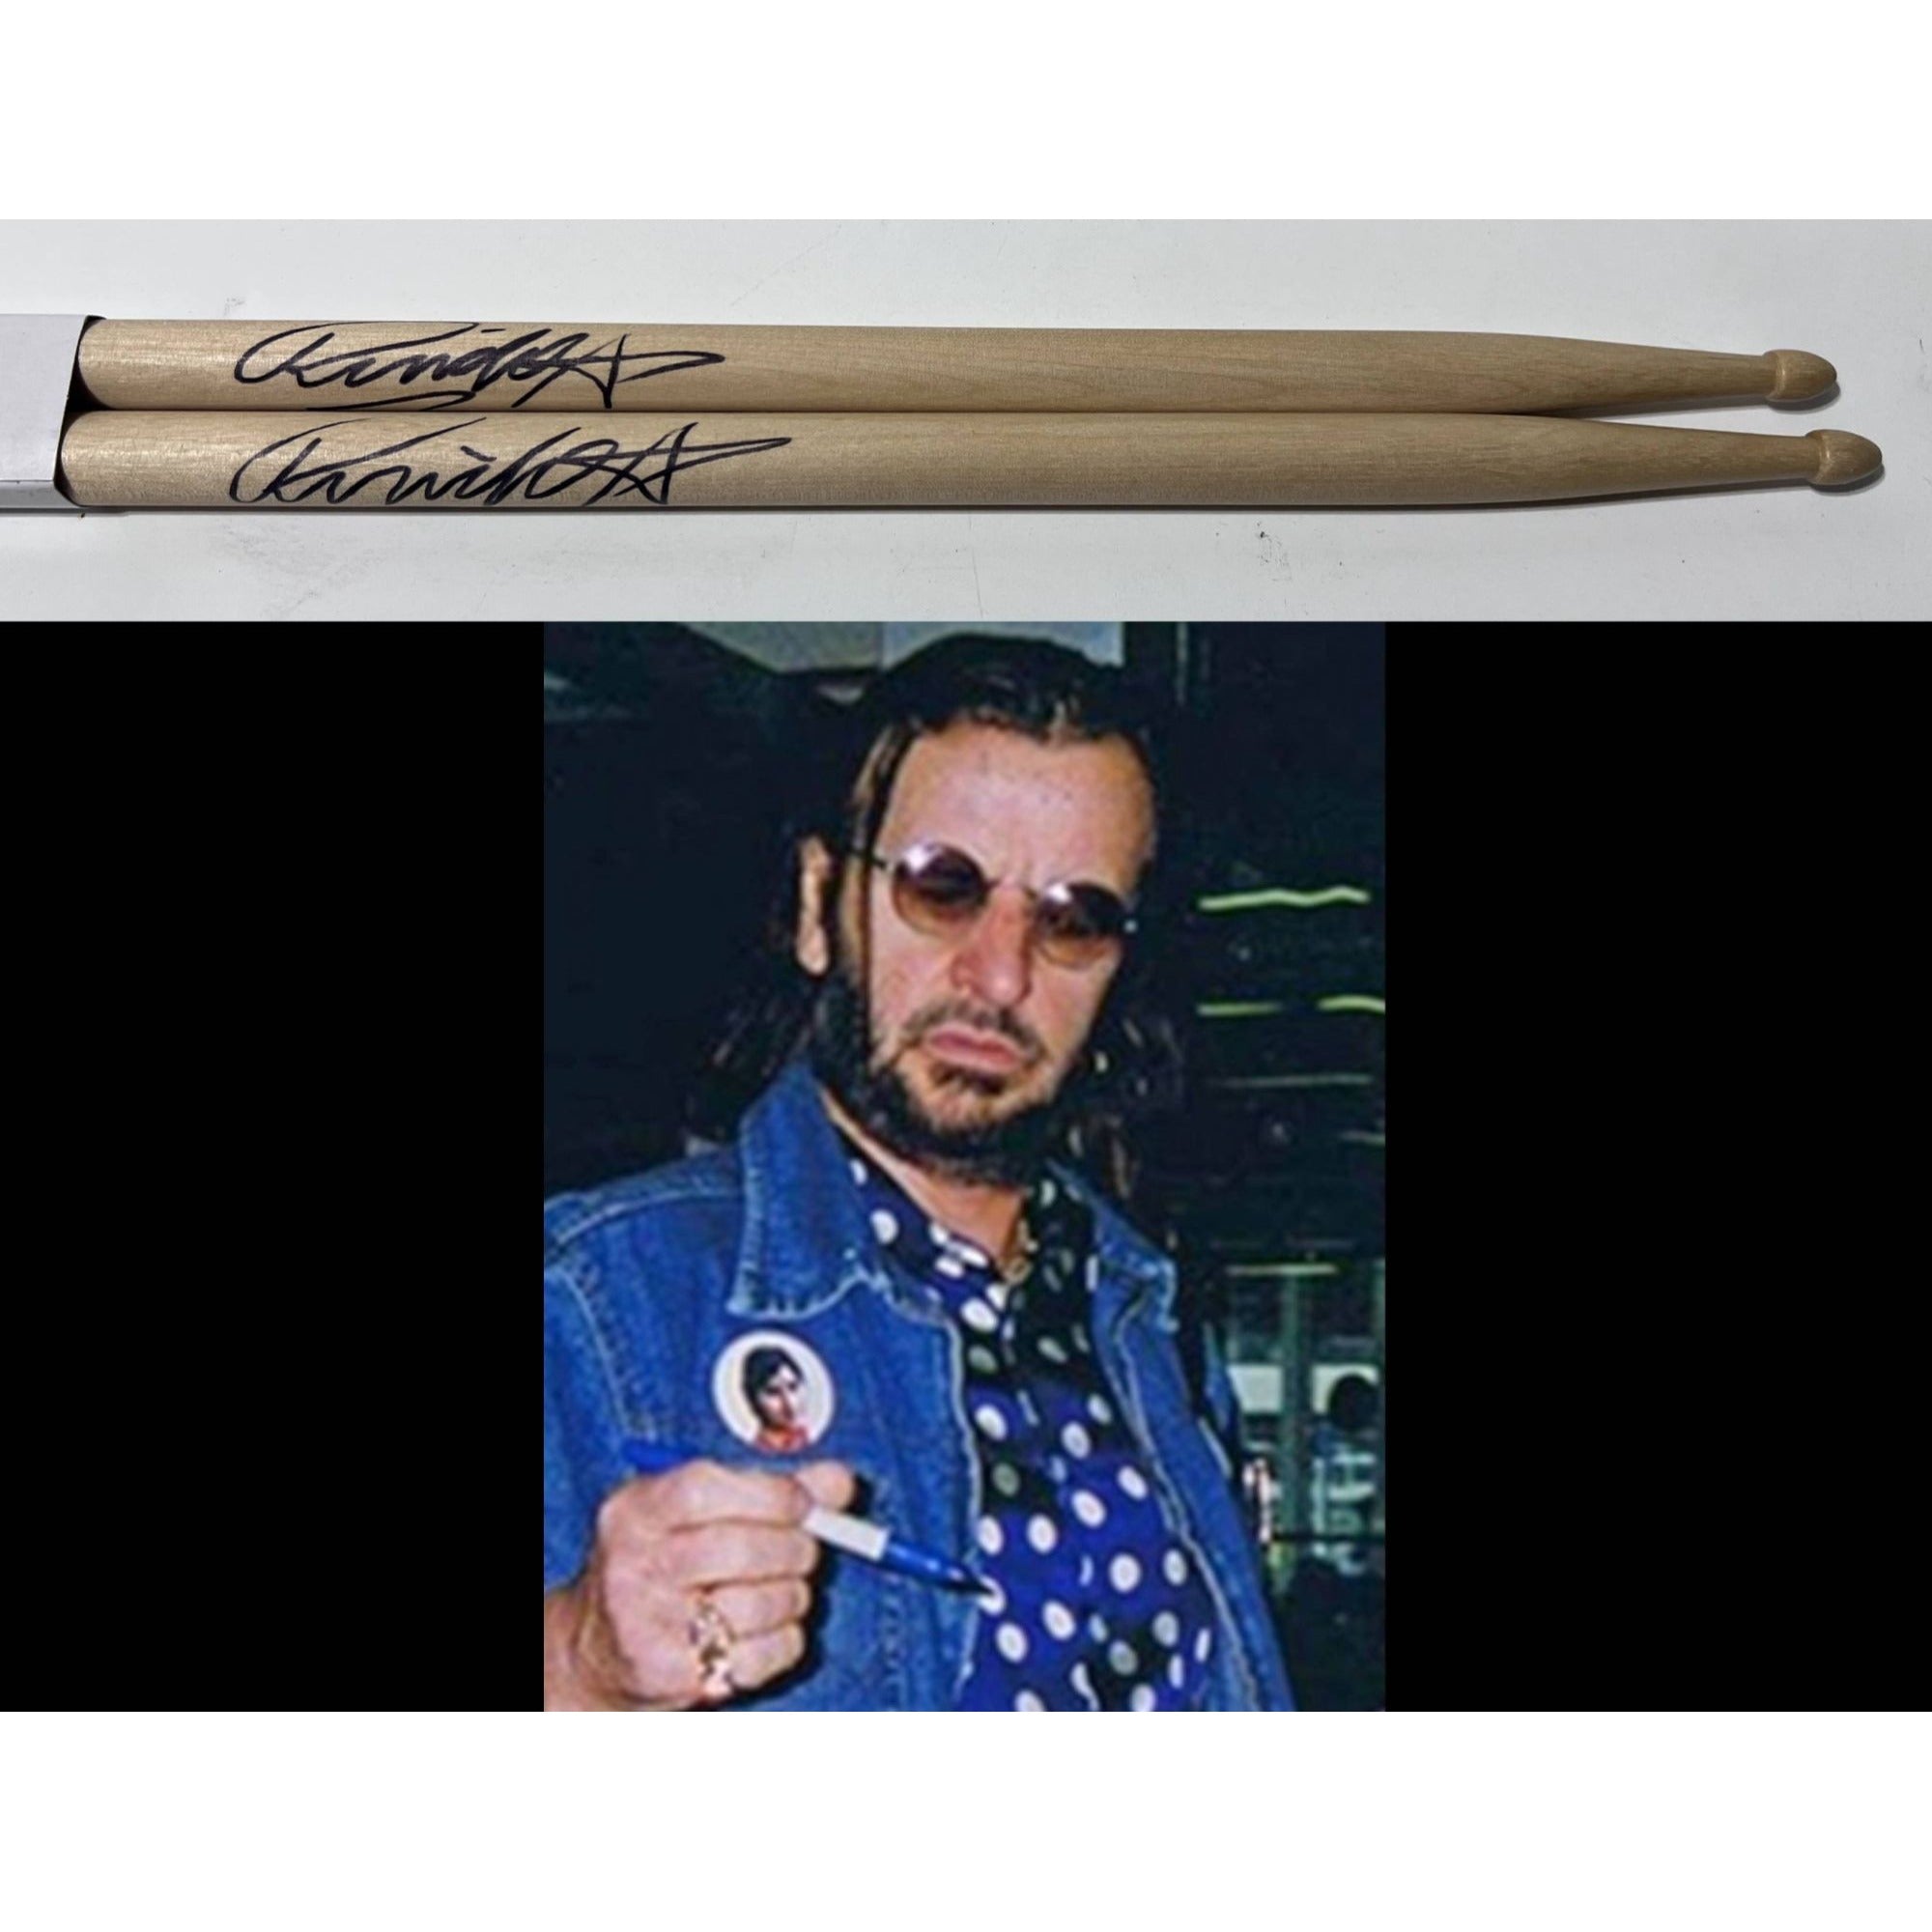 Ringo Starr The Beatles Drumsticks signed with proof